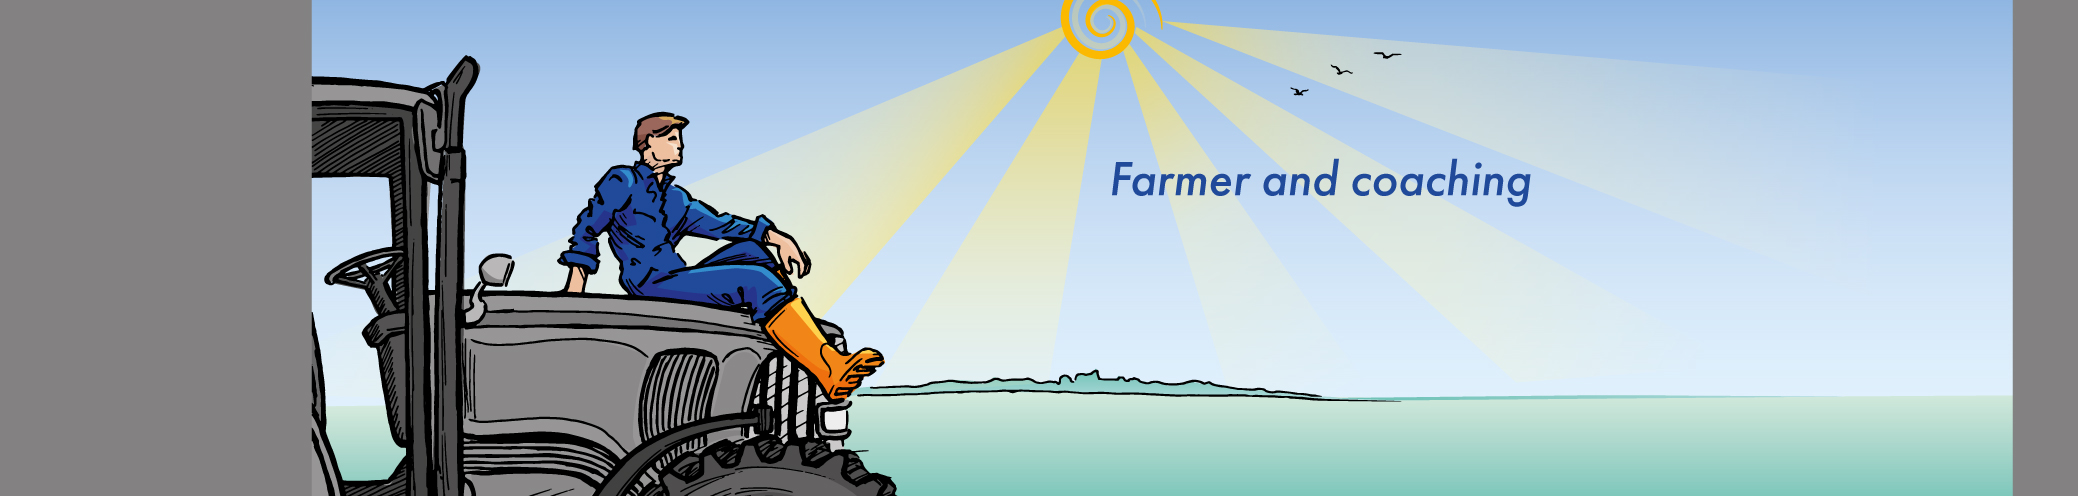 farmer and coaching. The farmer and uncertainties. Do I want to be a farmer?